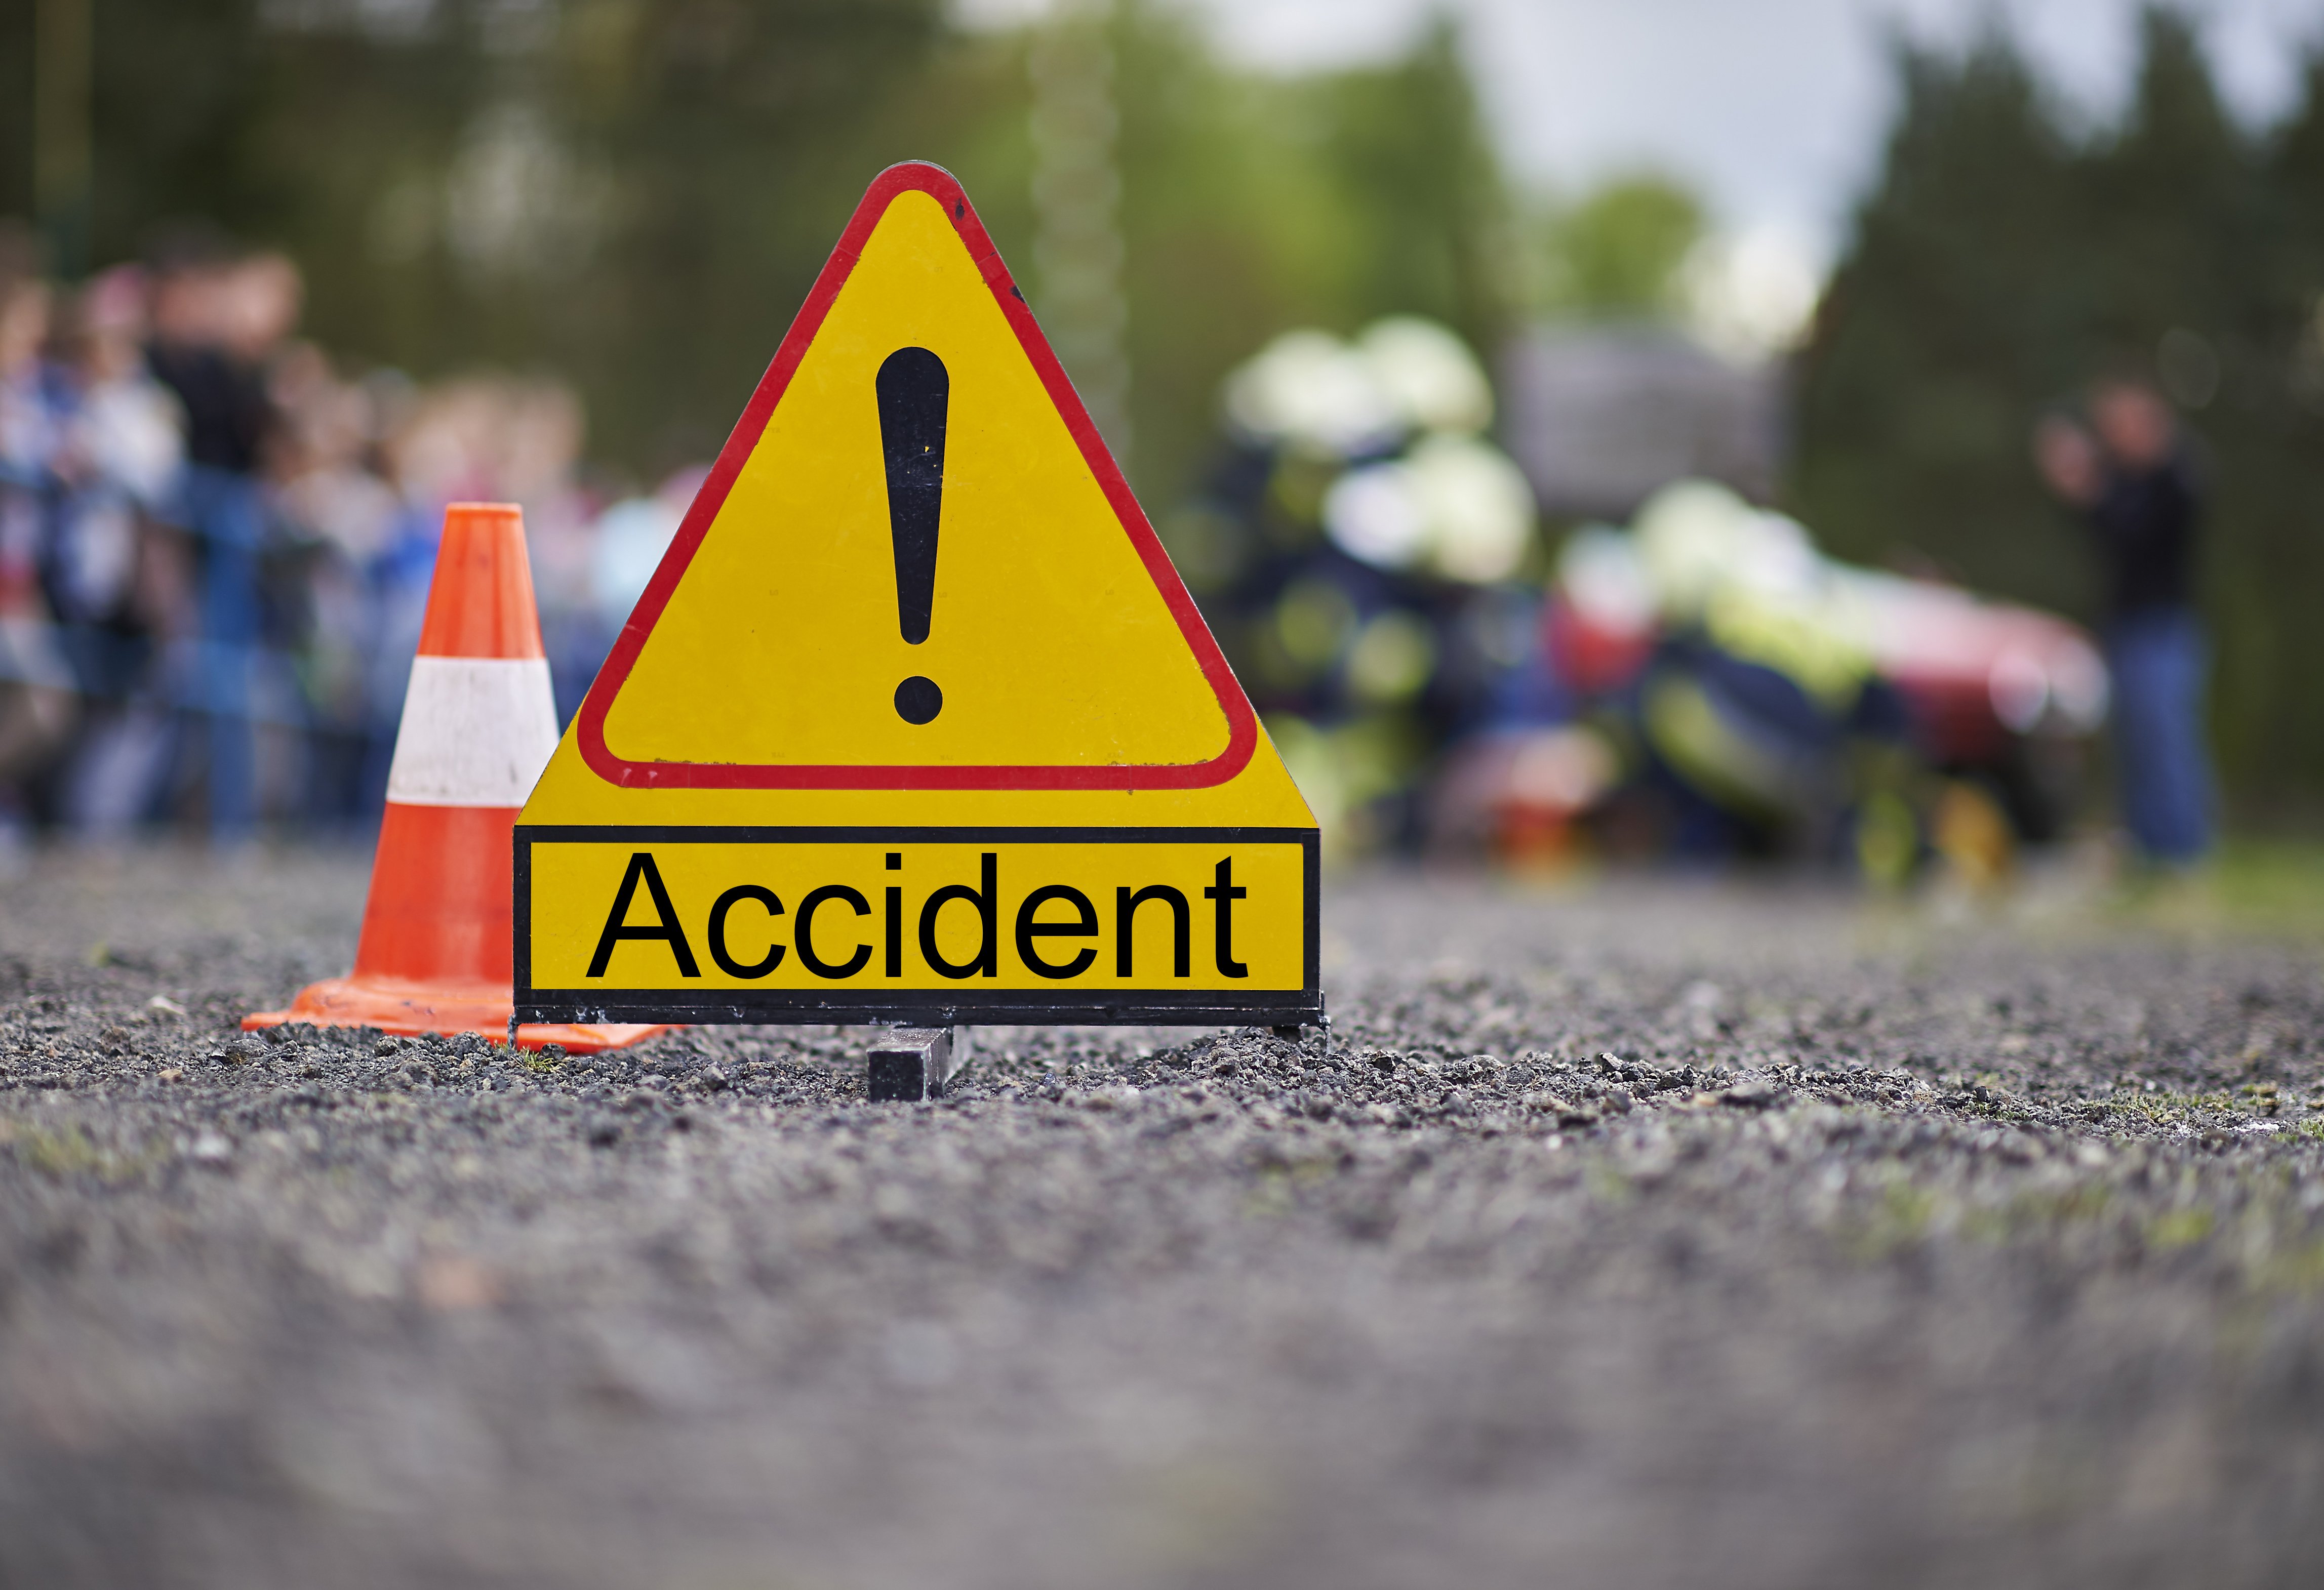 A photo of a road sign indicating an accident | Photo: Shutterstock